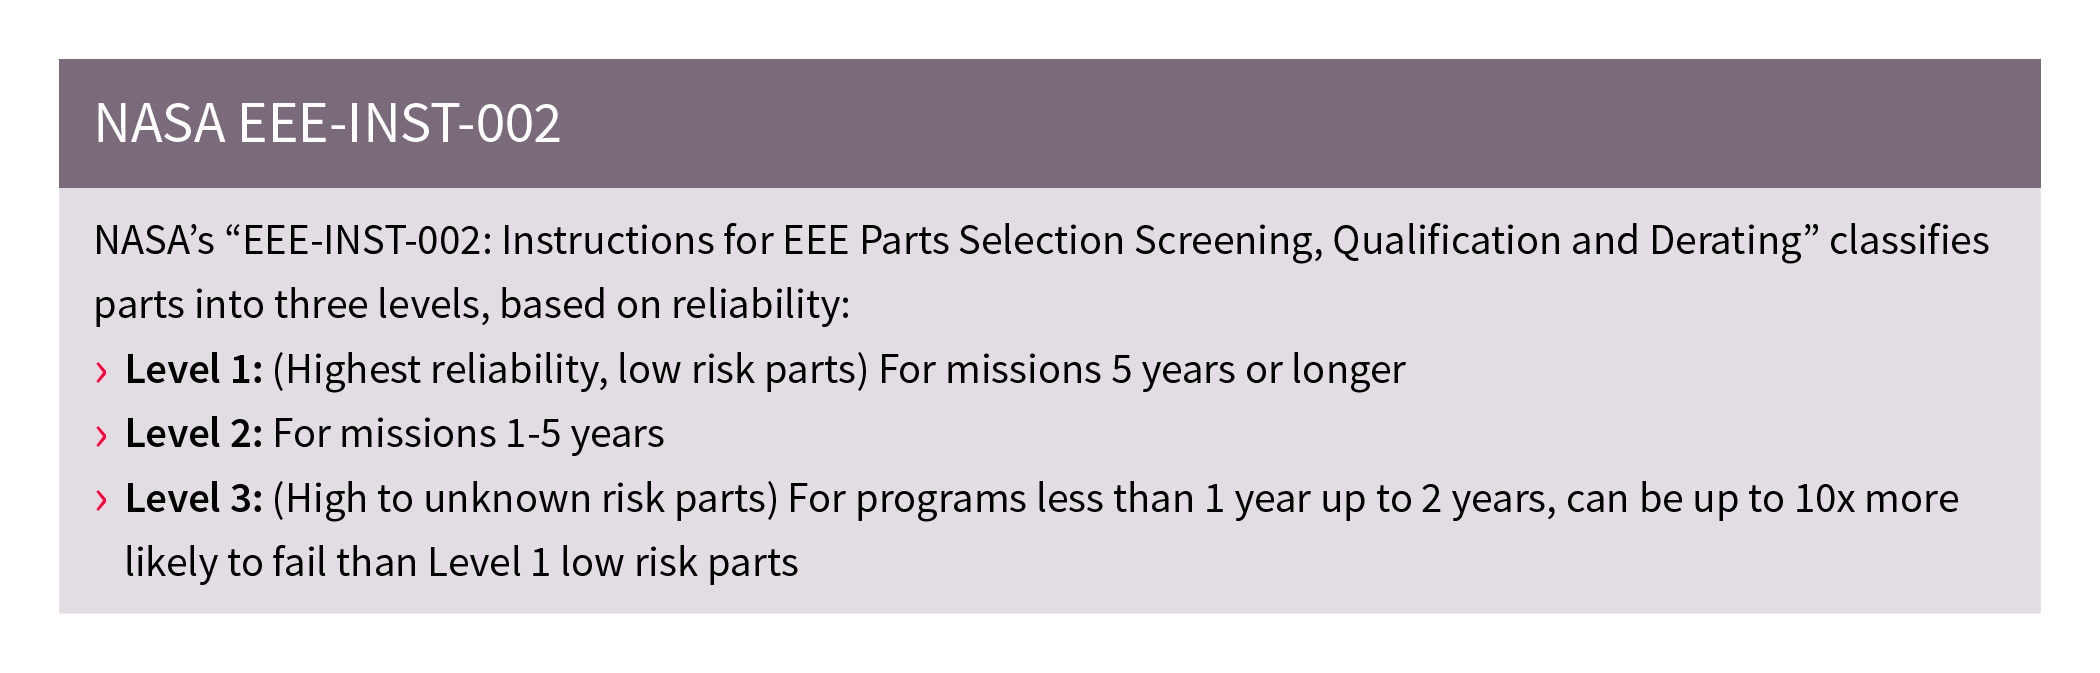 Table 1: NASA EEE INST-002: Instructions for EEE parts selection, screening, qualification and derating